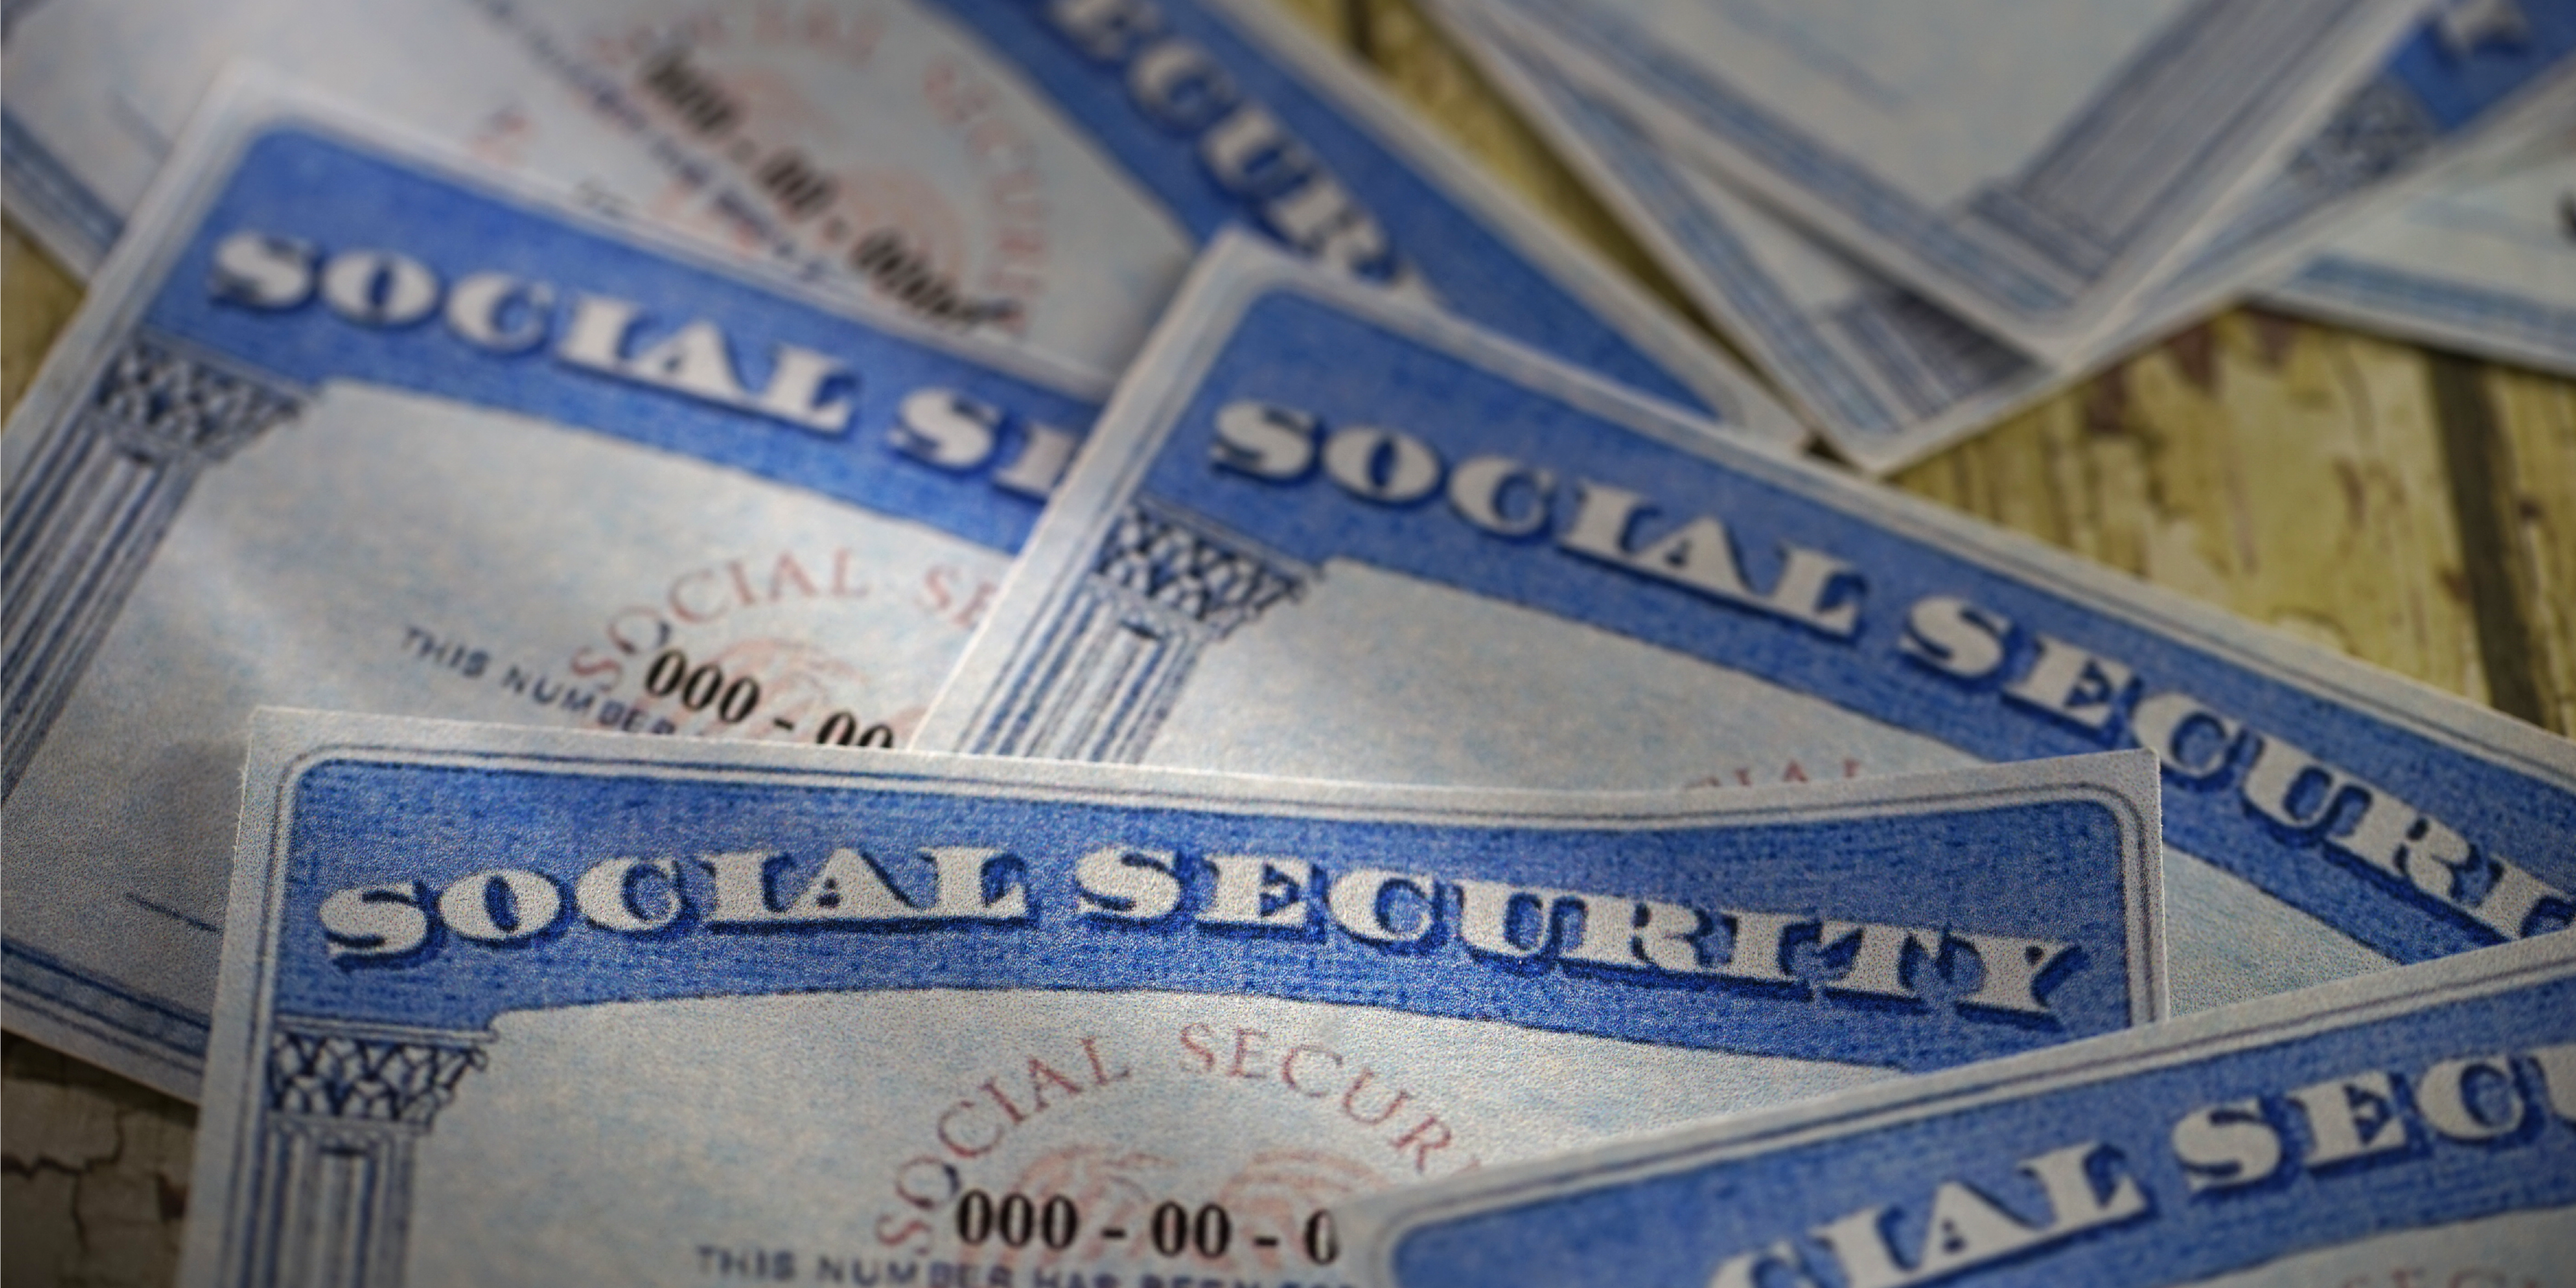 How will working affect social security benefits?